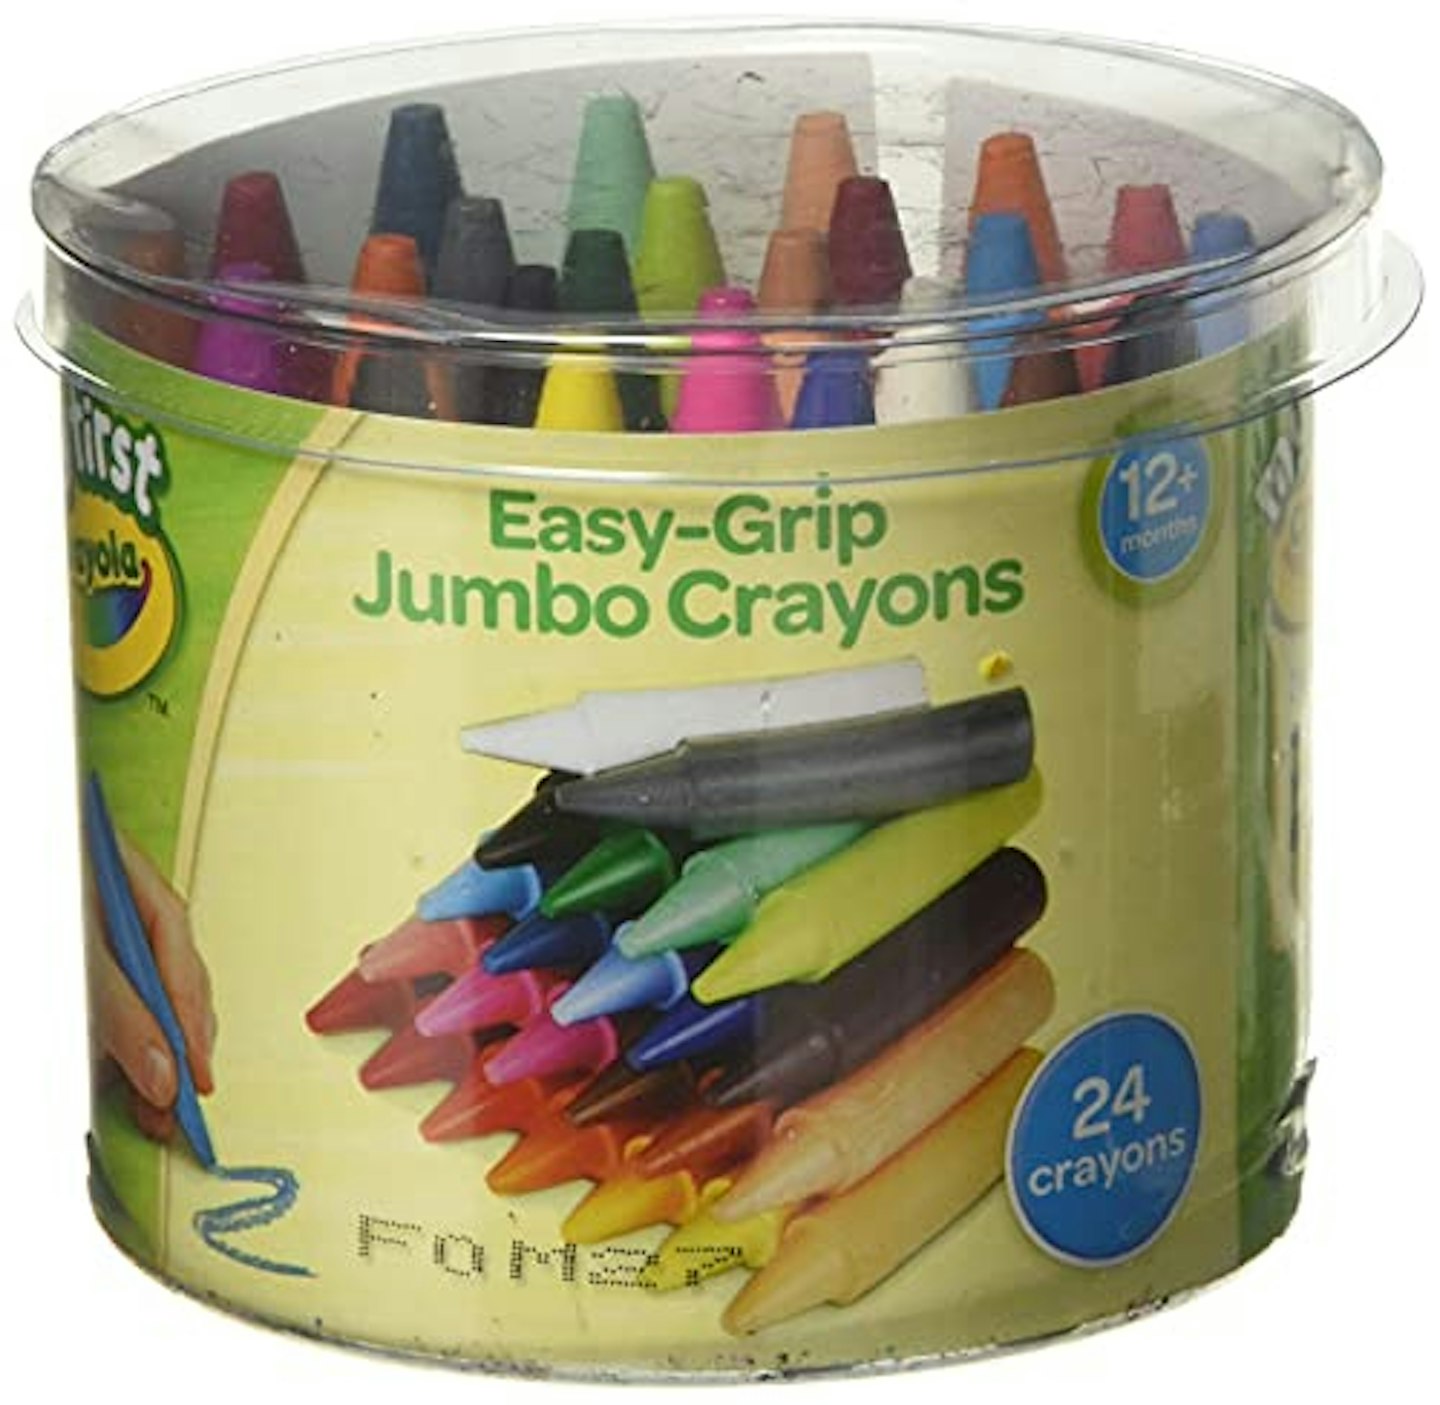 Jumbo Crayons for Toddlers, 12 Count, Multicolor